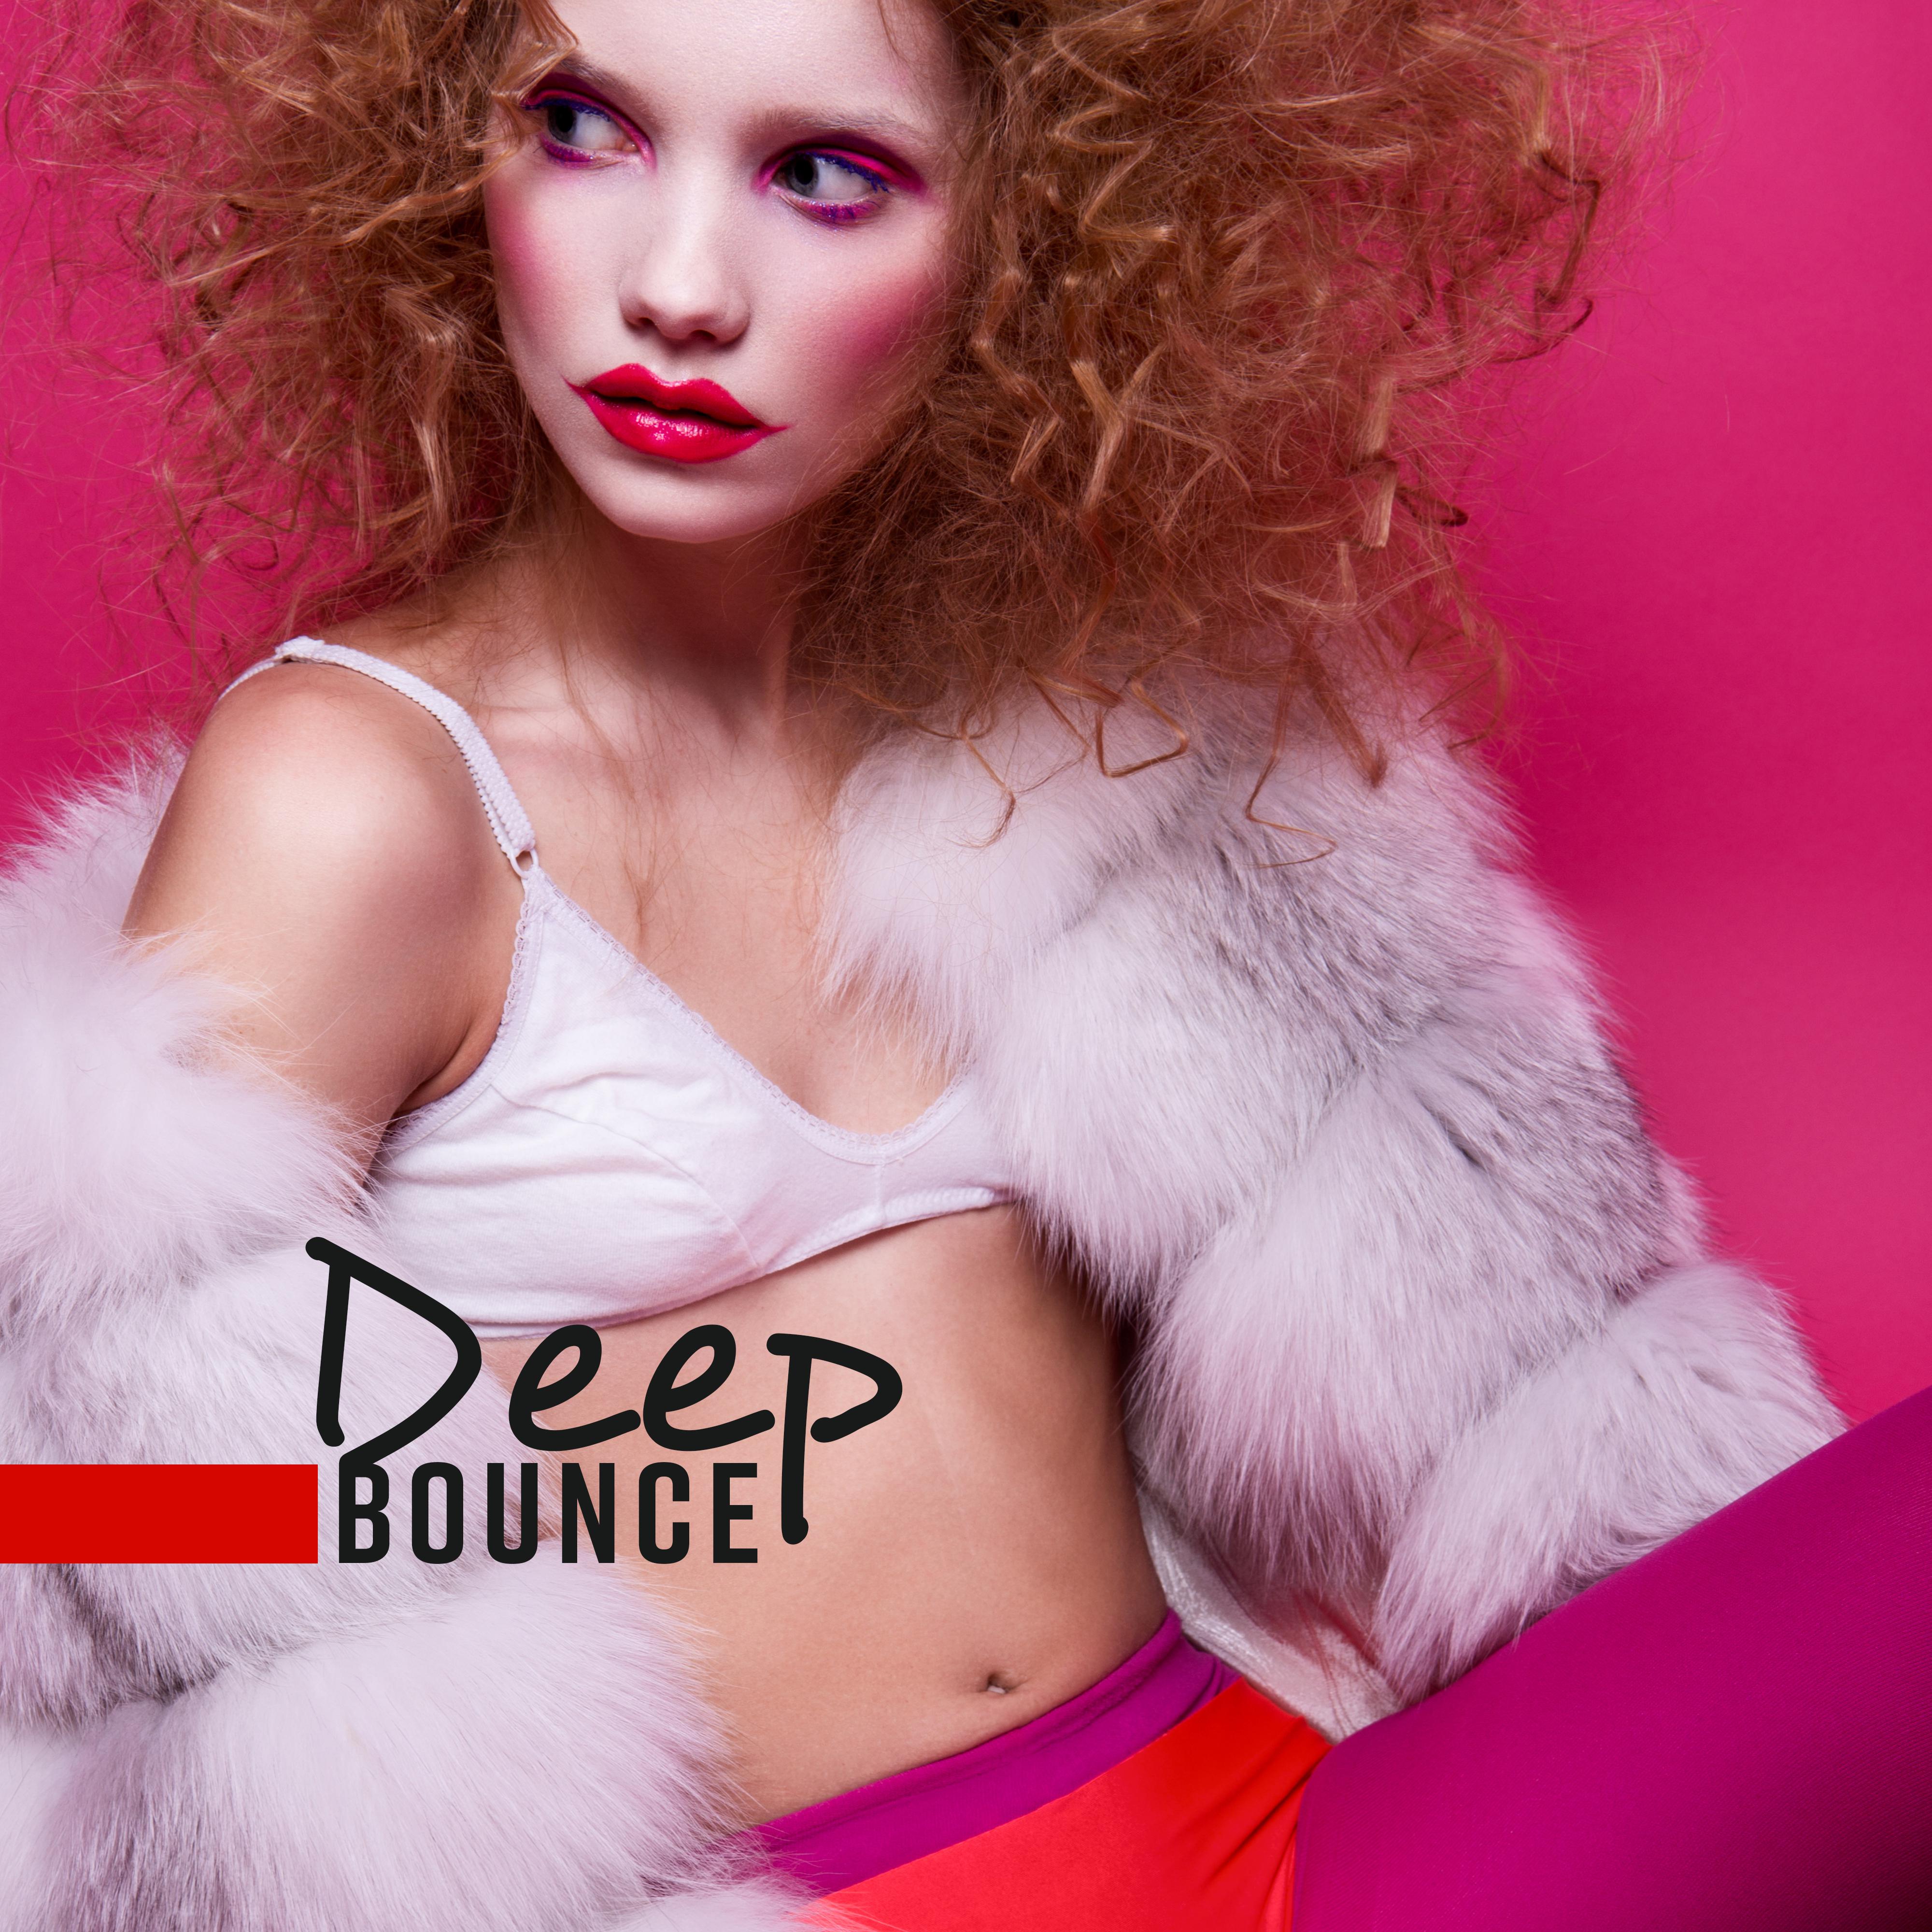 Deep Bounce: Setlist of the Best Club Melodies, Deep Bass, House and Chillout Mix for Dancing, on a Trip to the Car or Chill Out